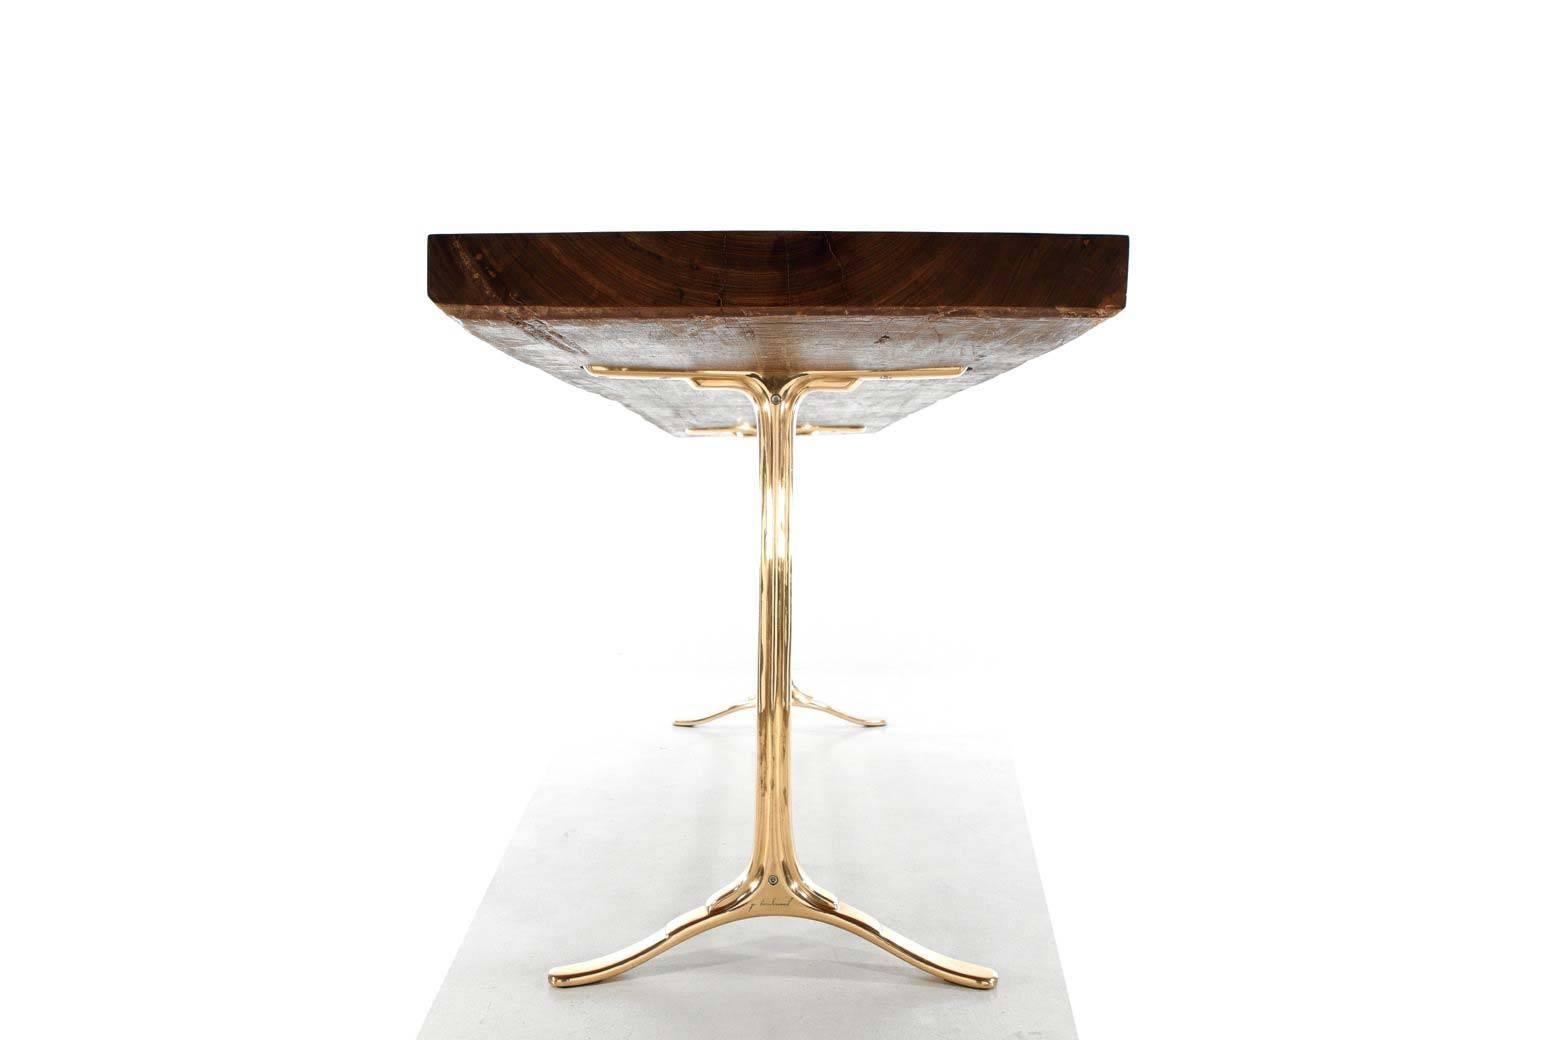 SALE

we are currently renovating our showroom and will accept a 30% reduction off Listed price.

Available now - one of kind

Model: PT4H
Top: Single slab of antique reclaimed hardwood
Top finish: Bleached and oiled with diamond oil
Base: Sand cast